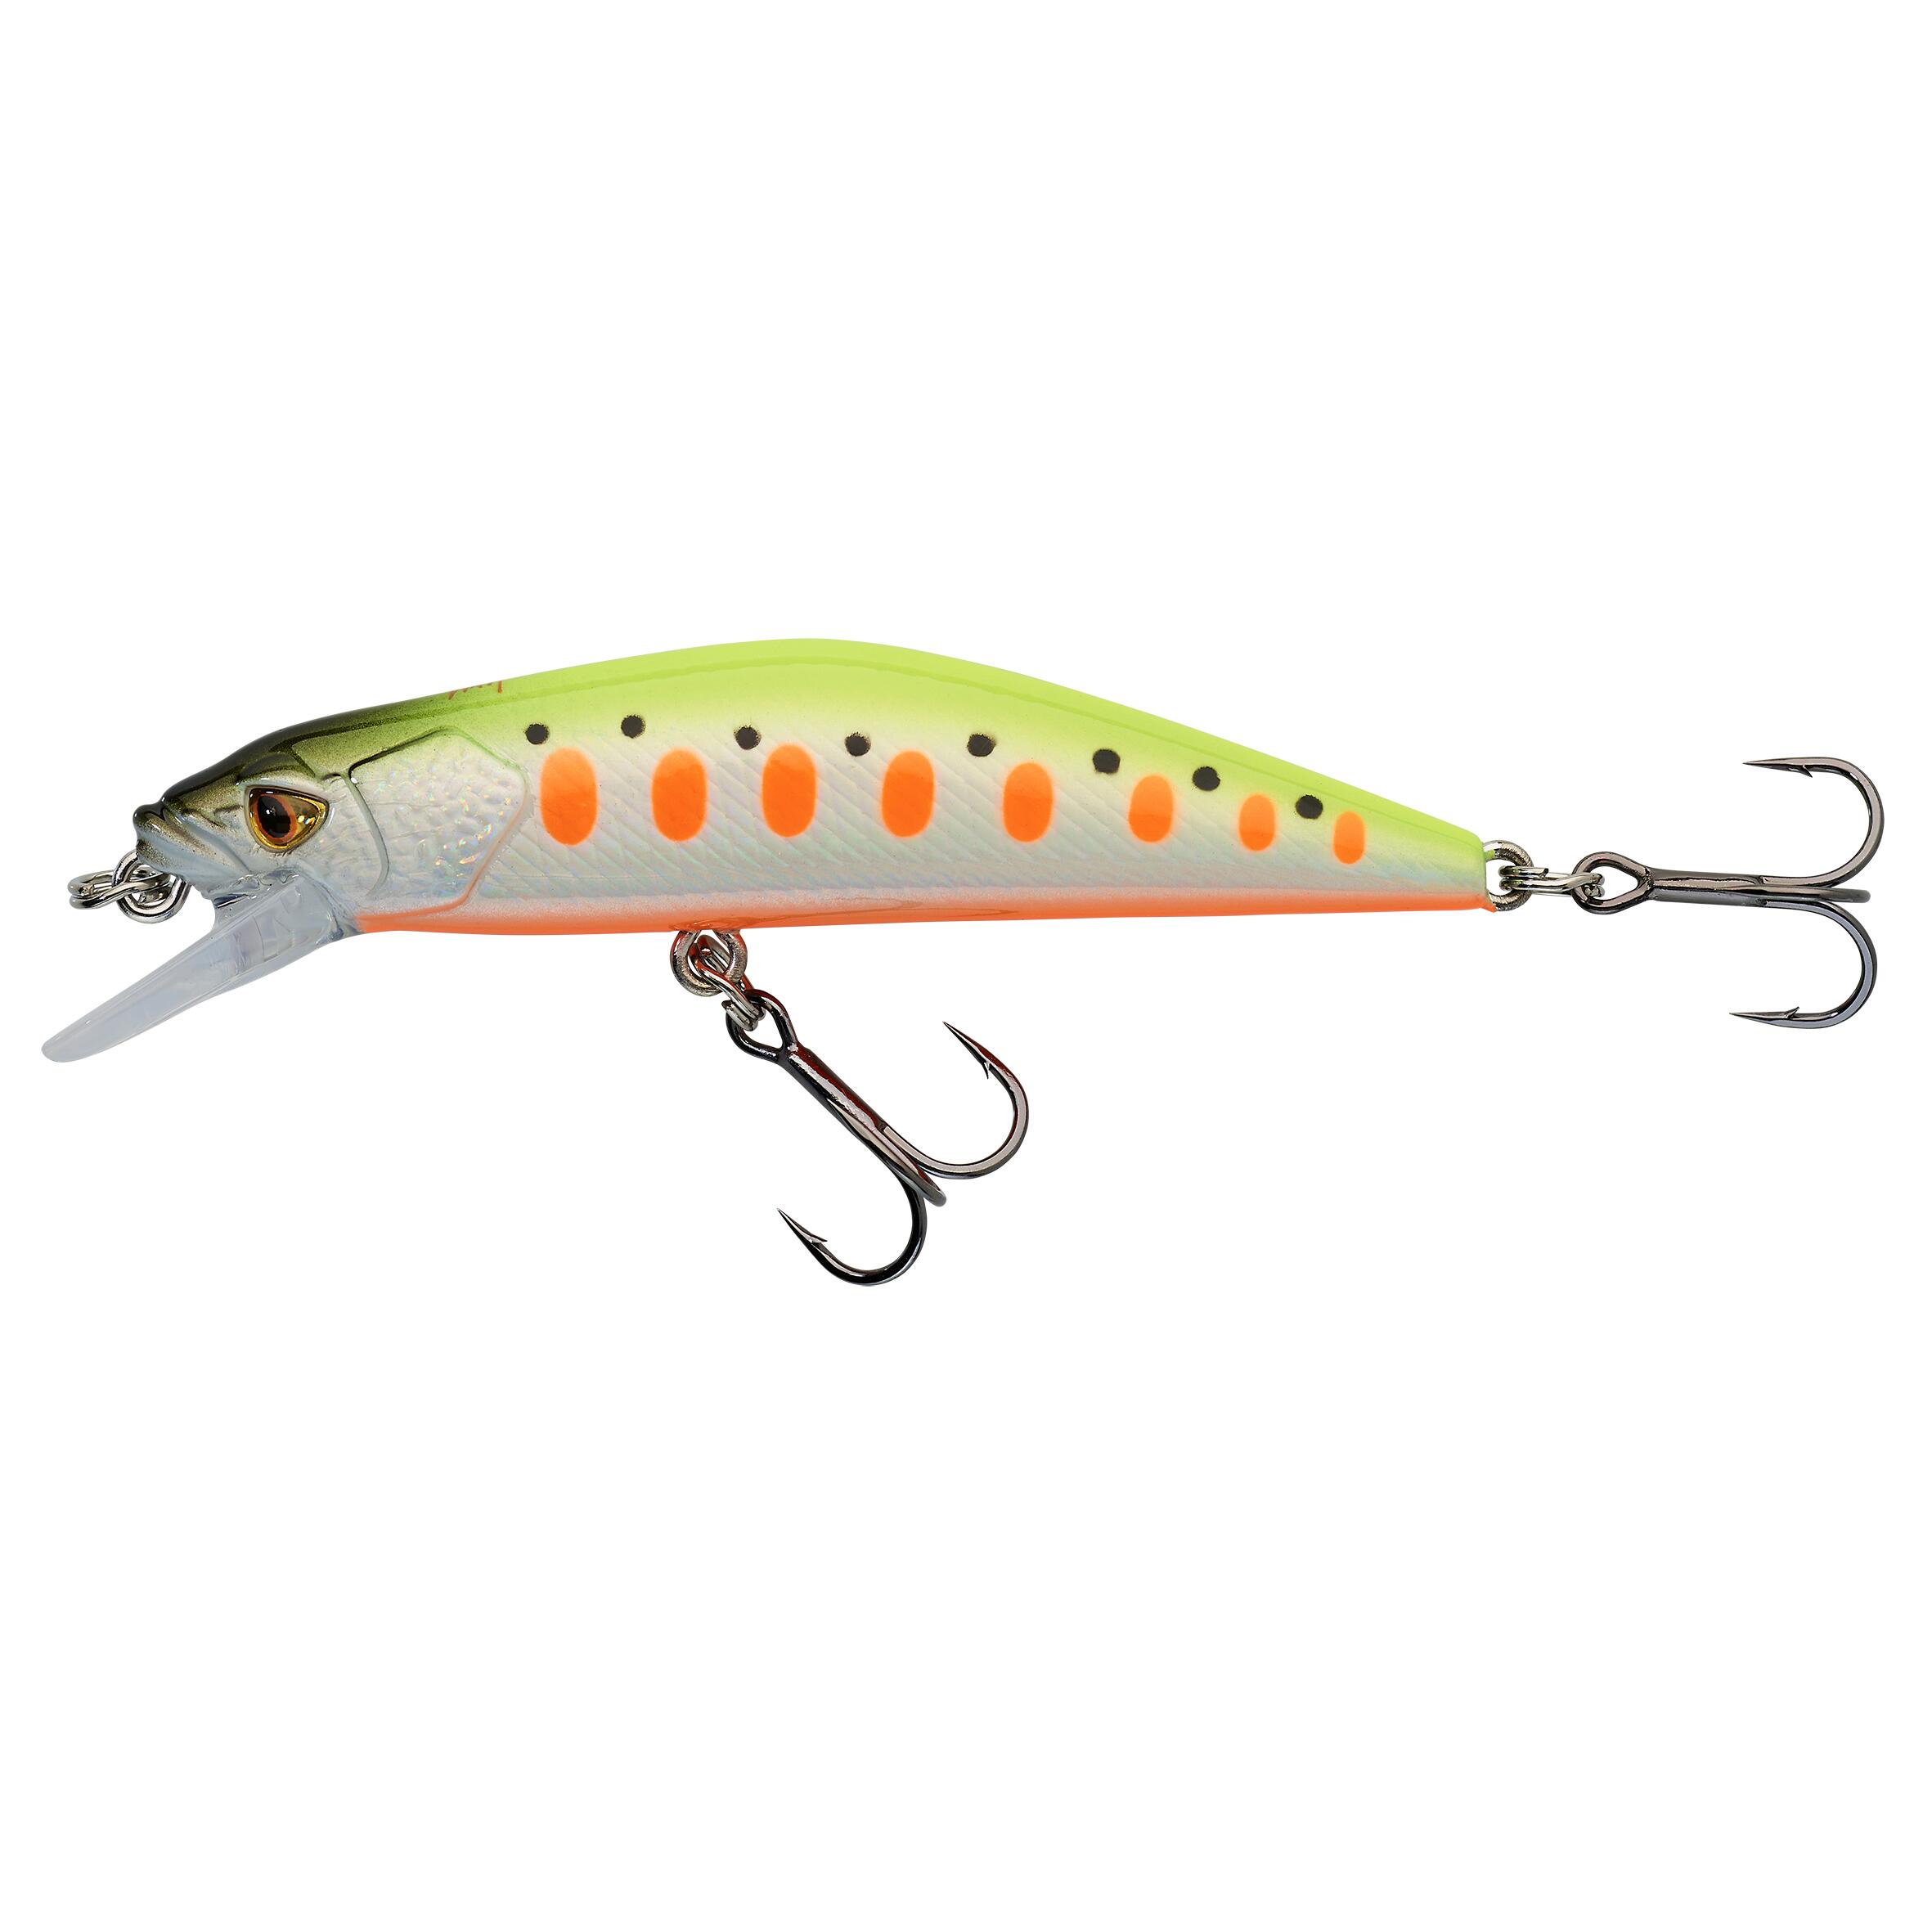 CAPERLAN MINNOW HARD LURE FOR TROUT WXM MNWFS 70 US NEON YELLOW